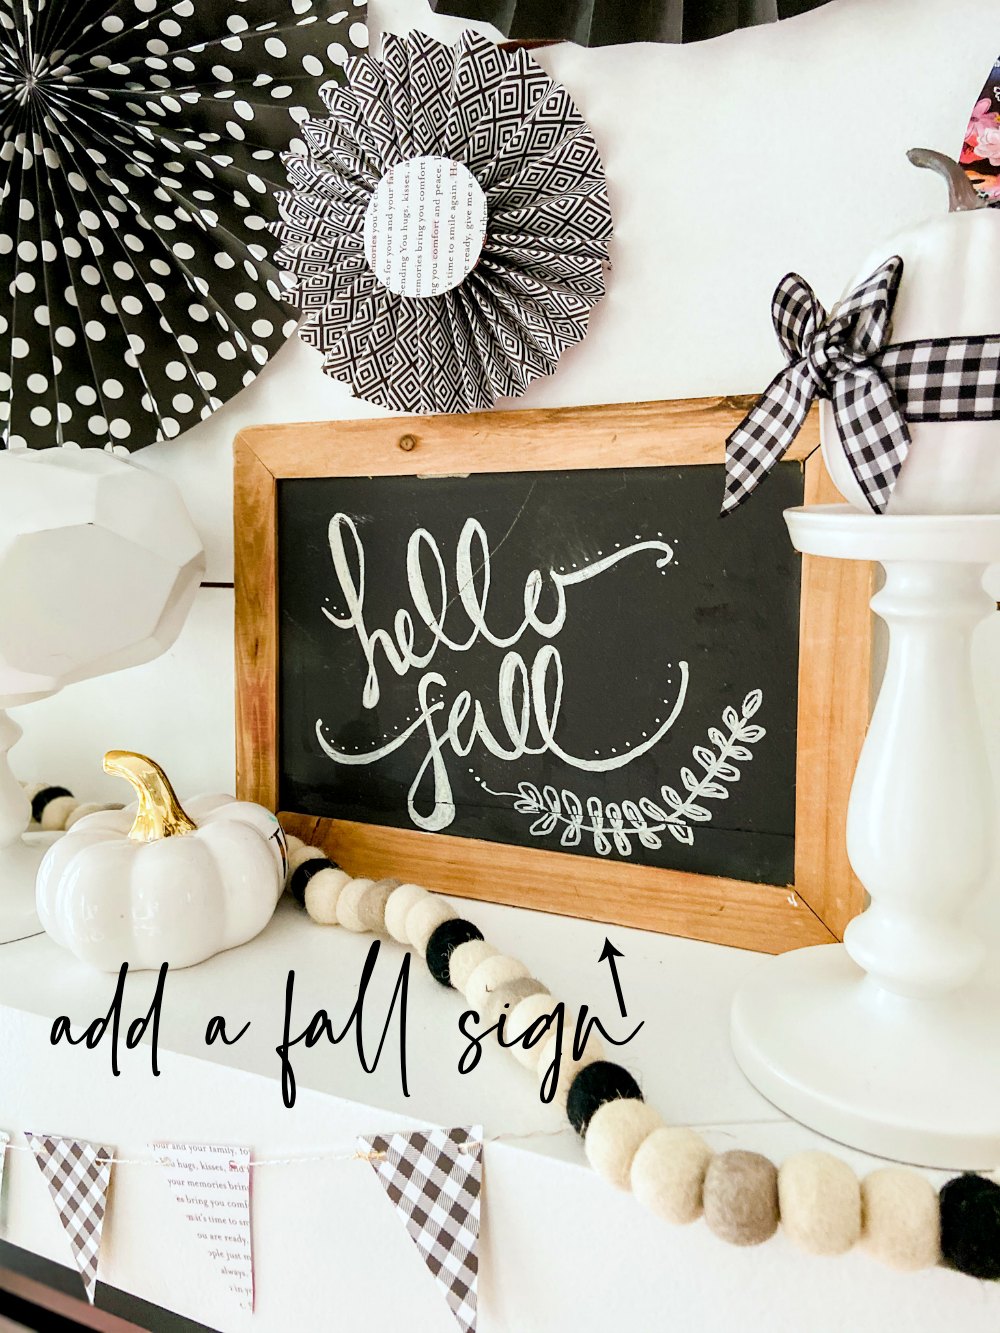 Easy Black and White Fall Mantel! Create a striking black and white mantel with pumpkins, DIY paper medallions and paper banner! 